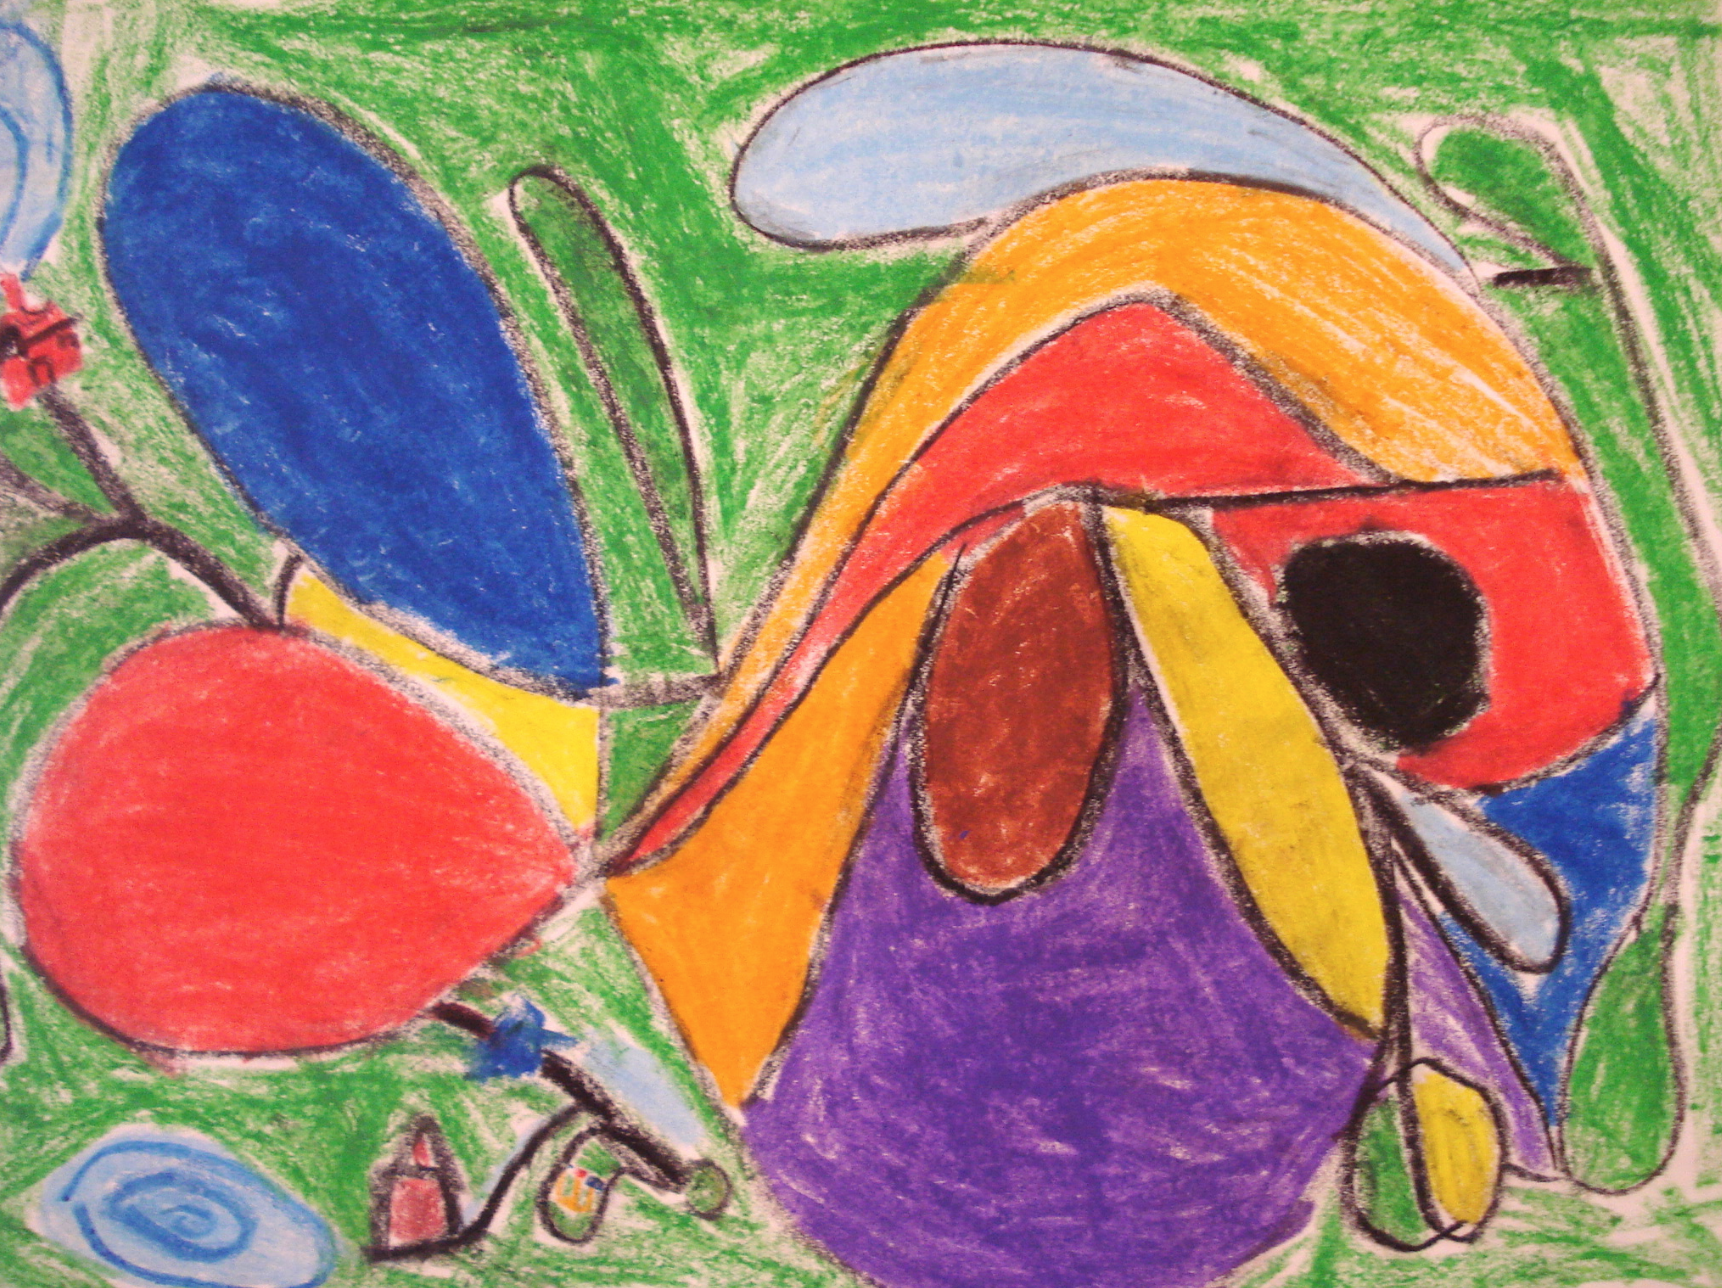 Early abstract influence at age 7 :)